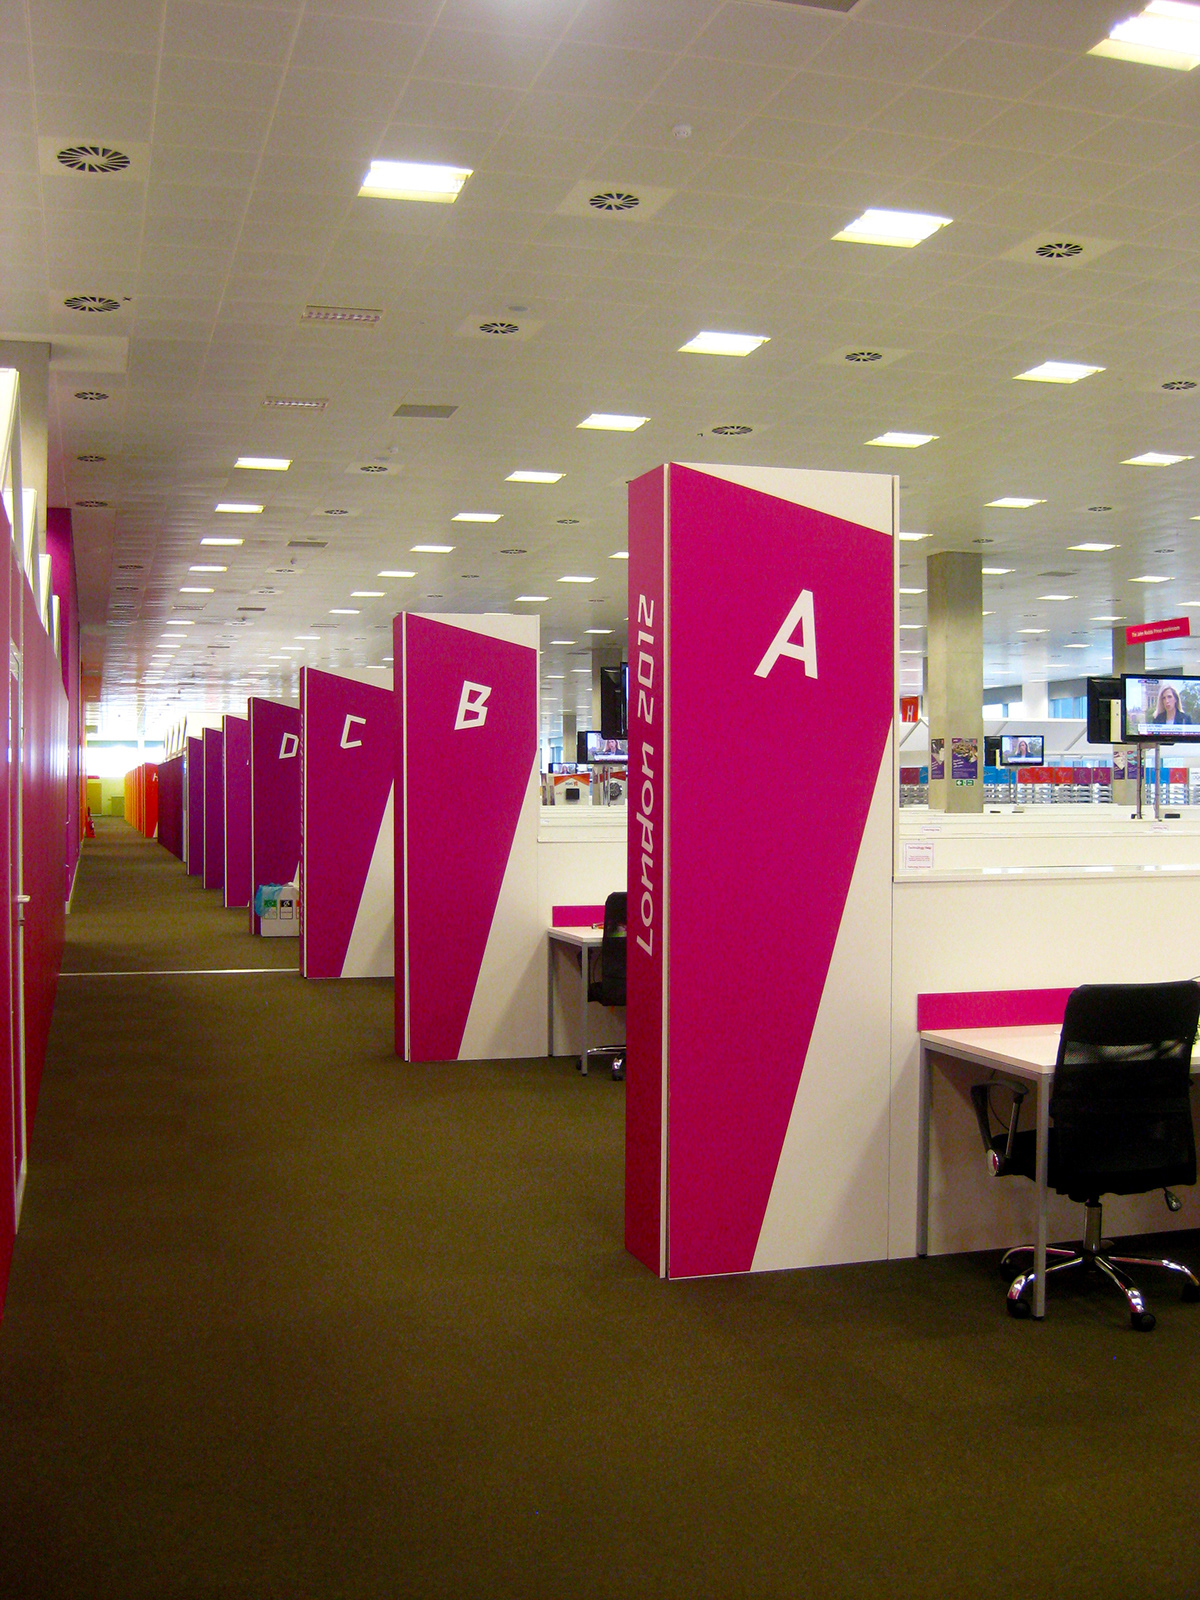 interiors Office Space olympic paralympic London 2012